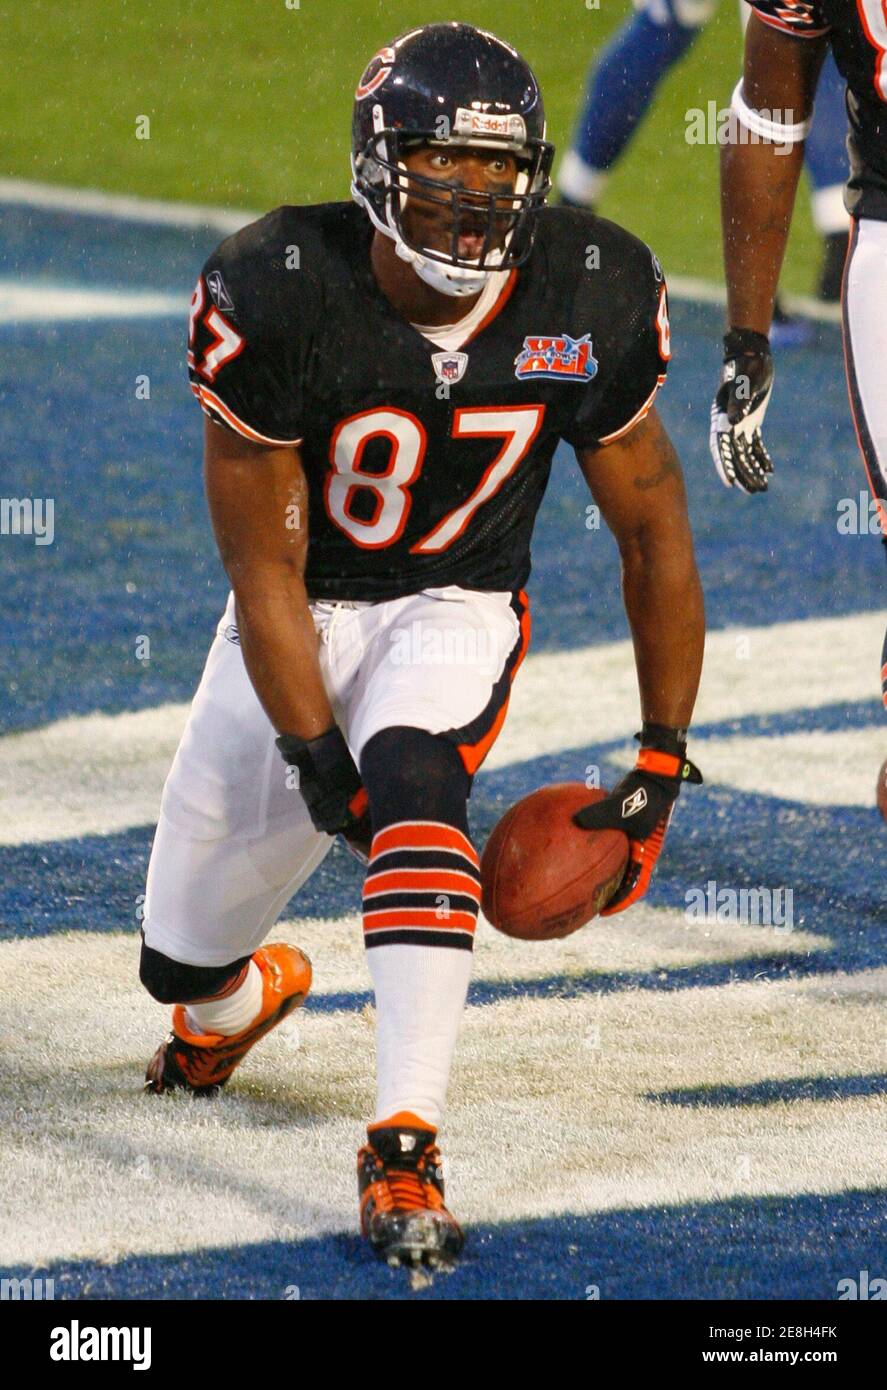 Chicago Bears Muhsin Muhammad celebrates scoring a touchdown on a pass from quarterback Rex Grossman against the Indianapolis Colts in the first quarter of the NFL's Super Bowl XLI football game in Miami, Florida February 4, 2007.     REUTERS/Gary Cameron (UNITED STATES) Stock Photo